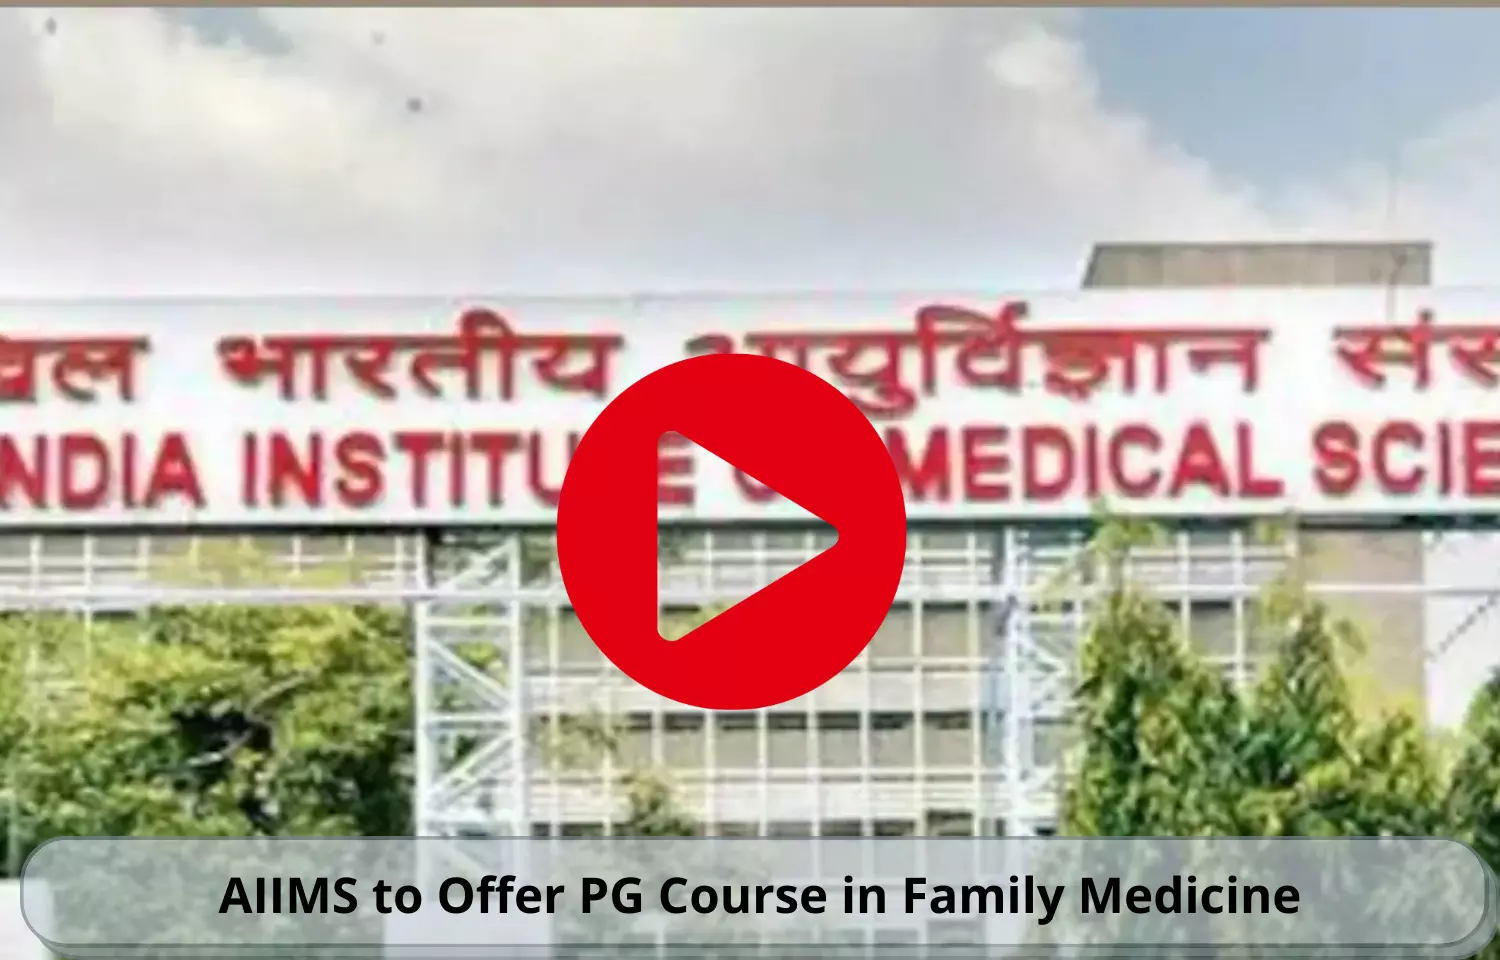 AIIMS to offer PG course in Family Medicine at its six branches